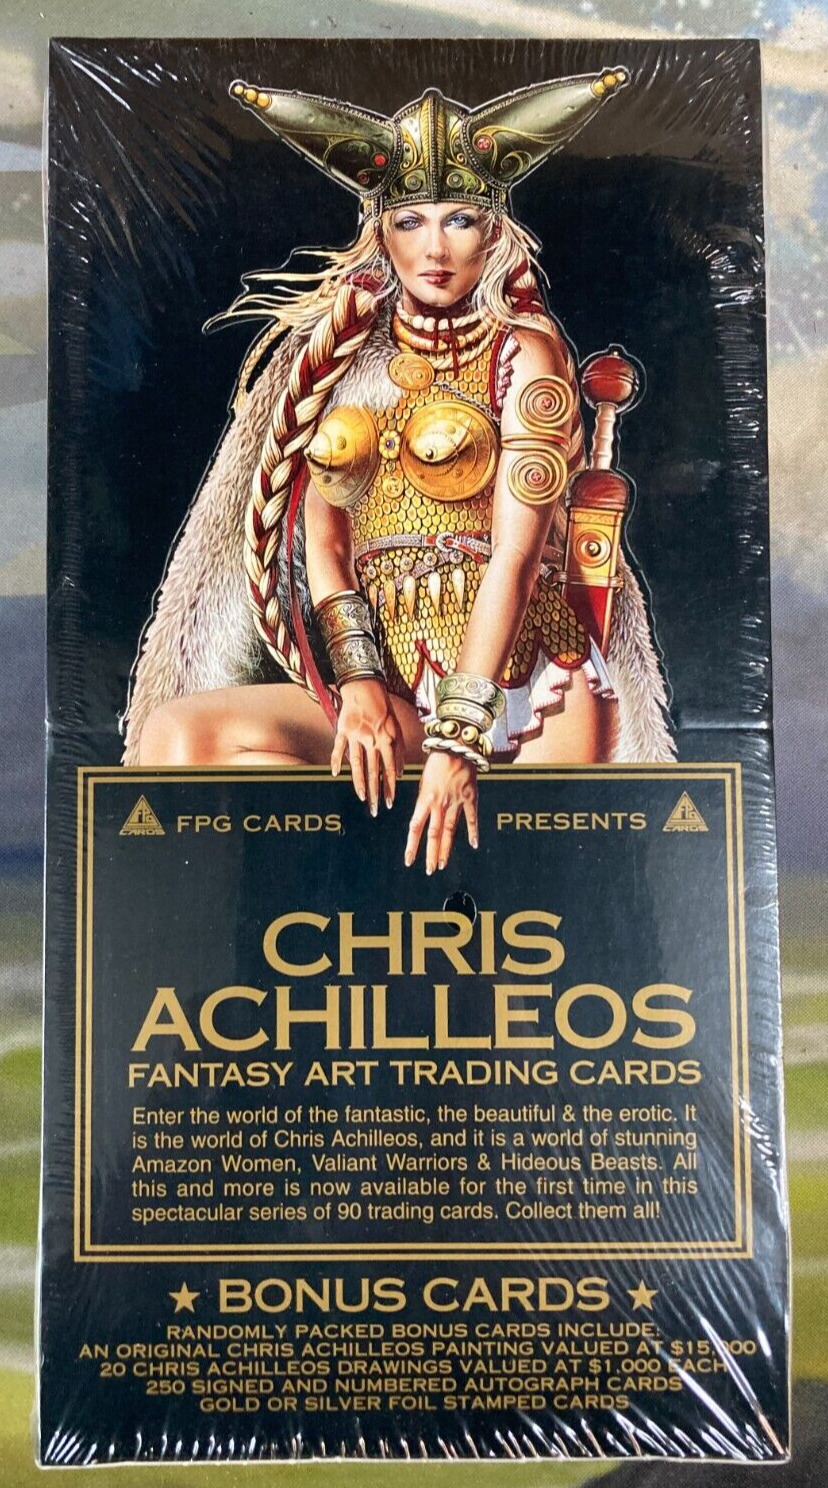 1992 Chris Achilleos Sealed Trading Card Box FPG Cards